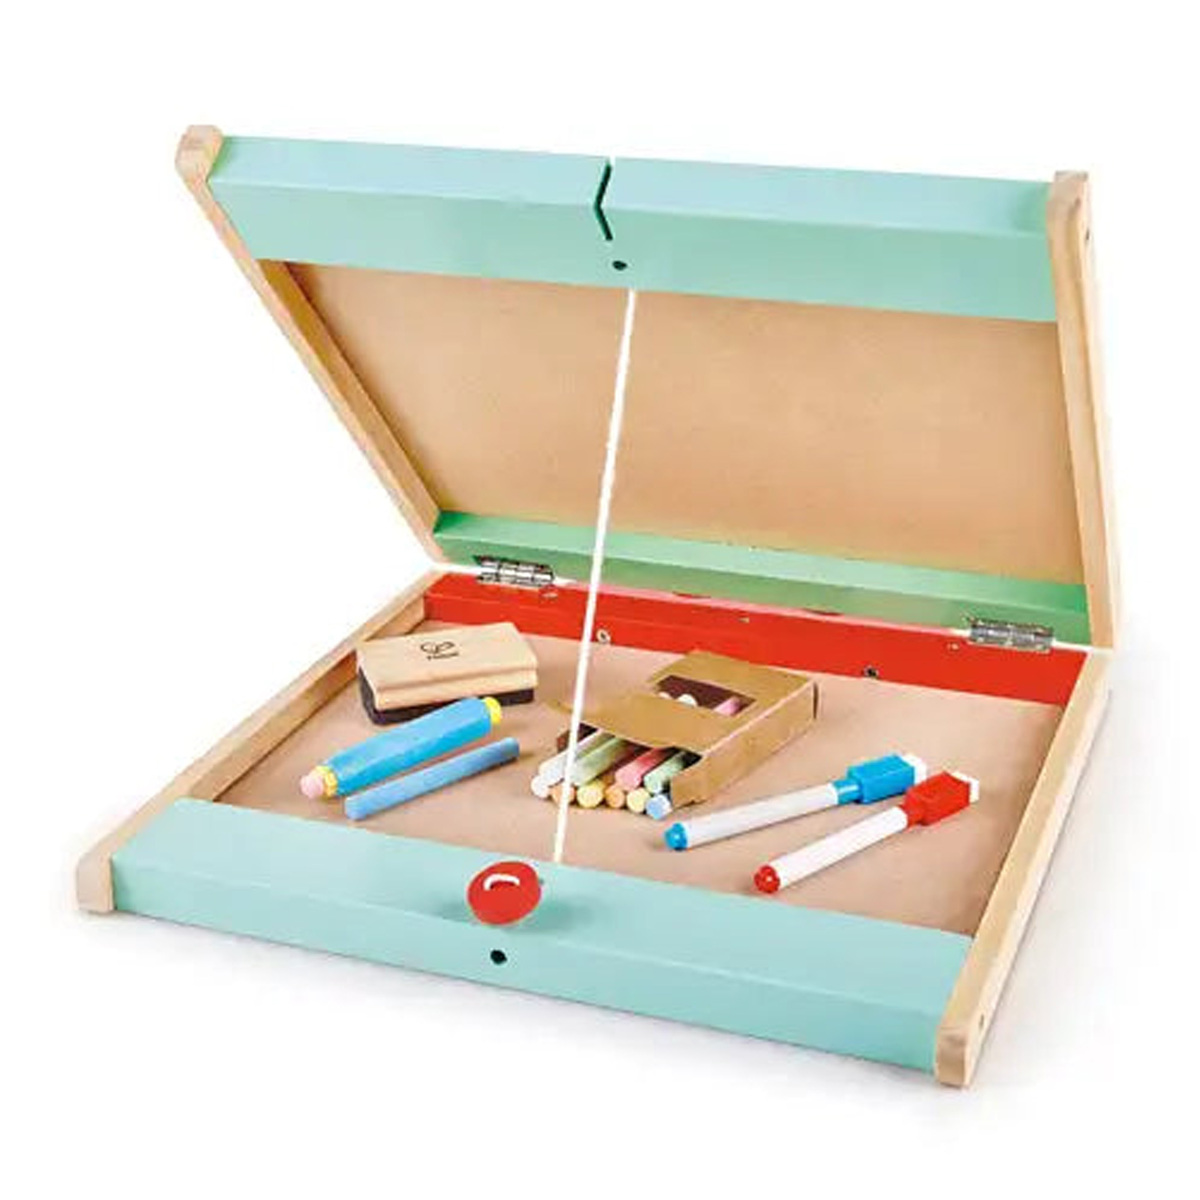 Hape Store and Go Easel Folding Double-Sided Tabletop for Kids, E1062